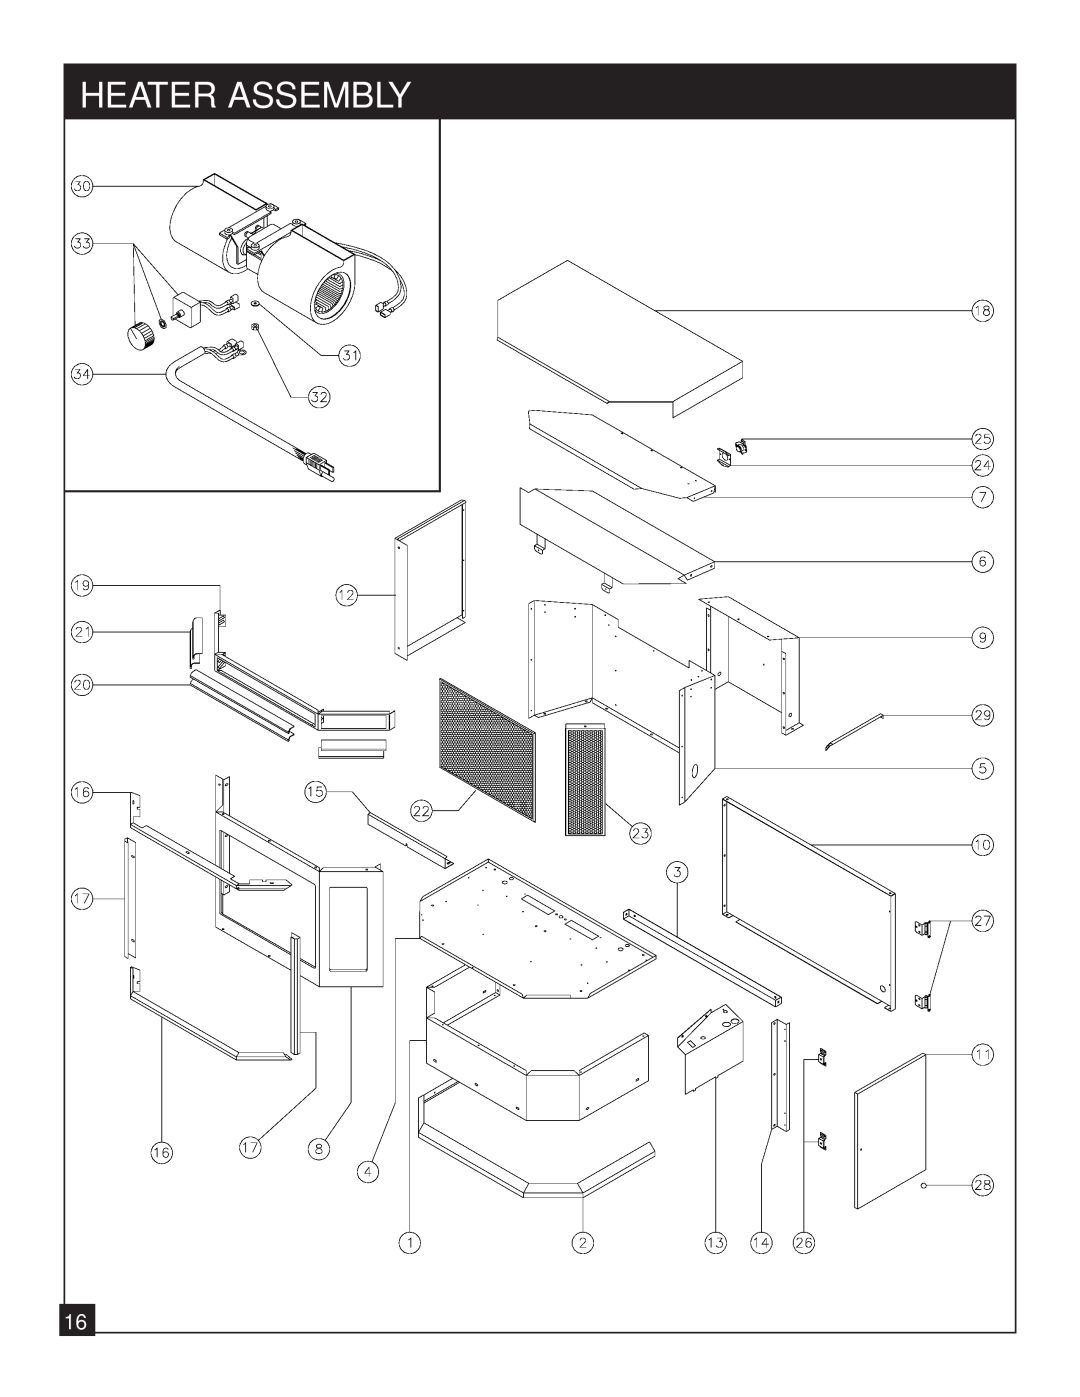 United States Stove 9947 installation manual Heater Assembly 